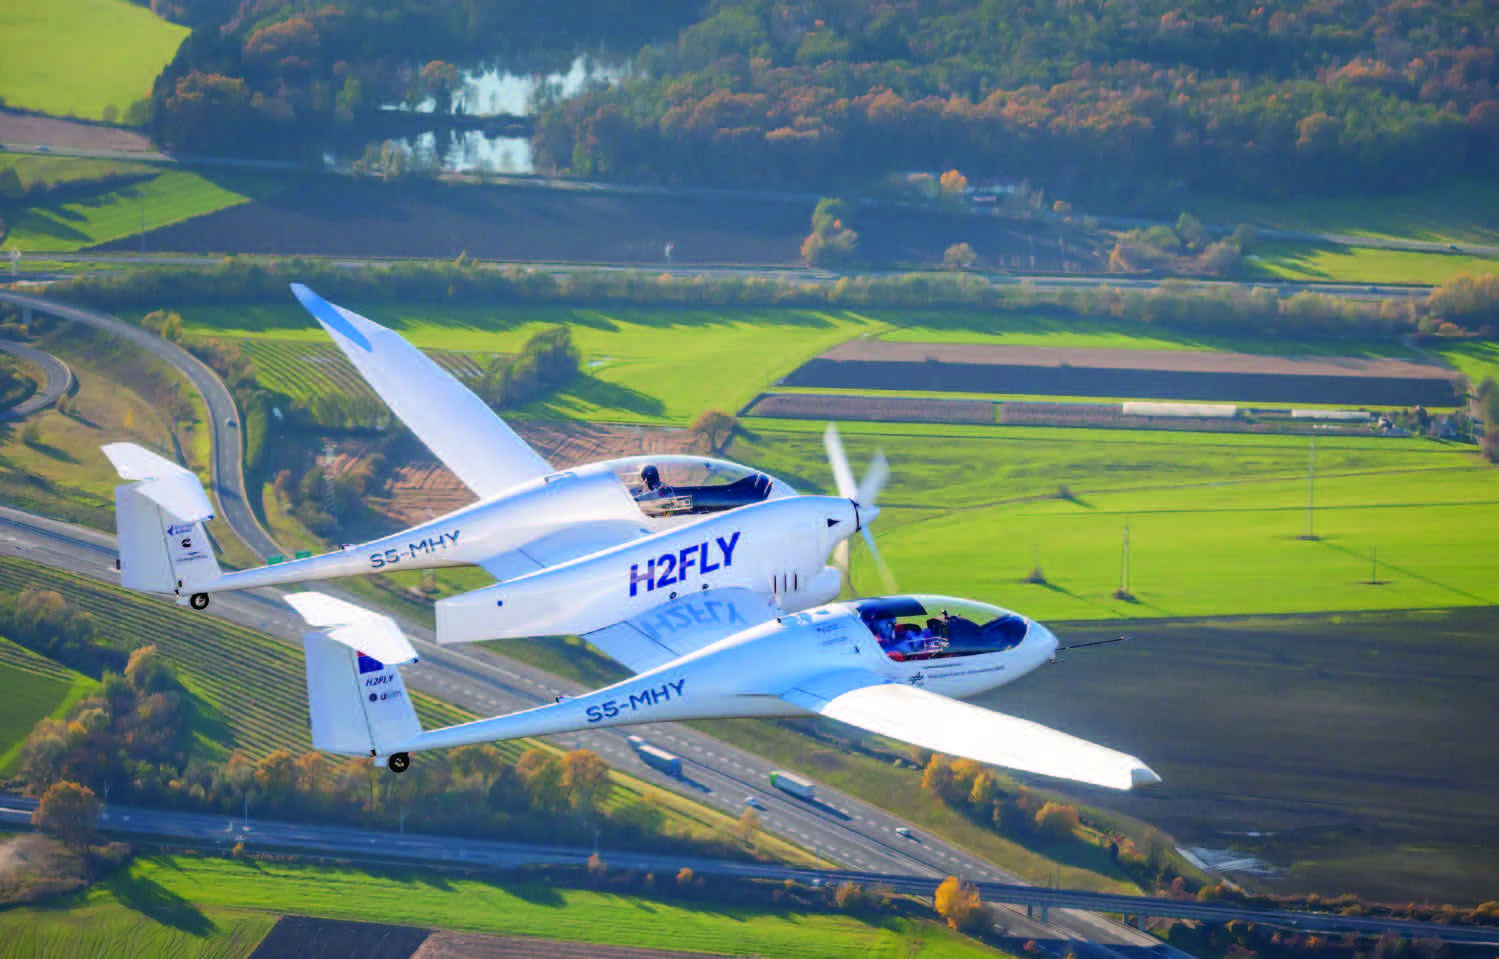 The HY4 can seat up to four fliers and has a range of 932 miles. Credit: H2Fly